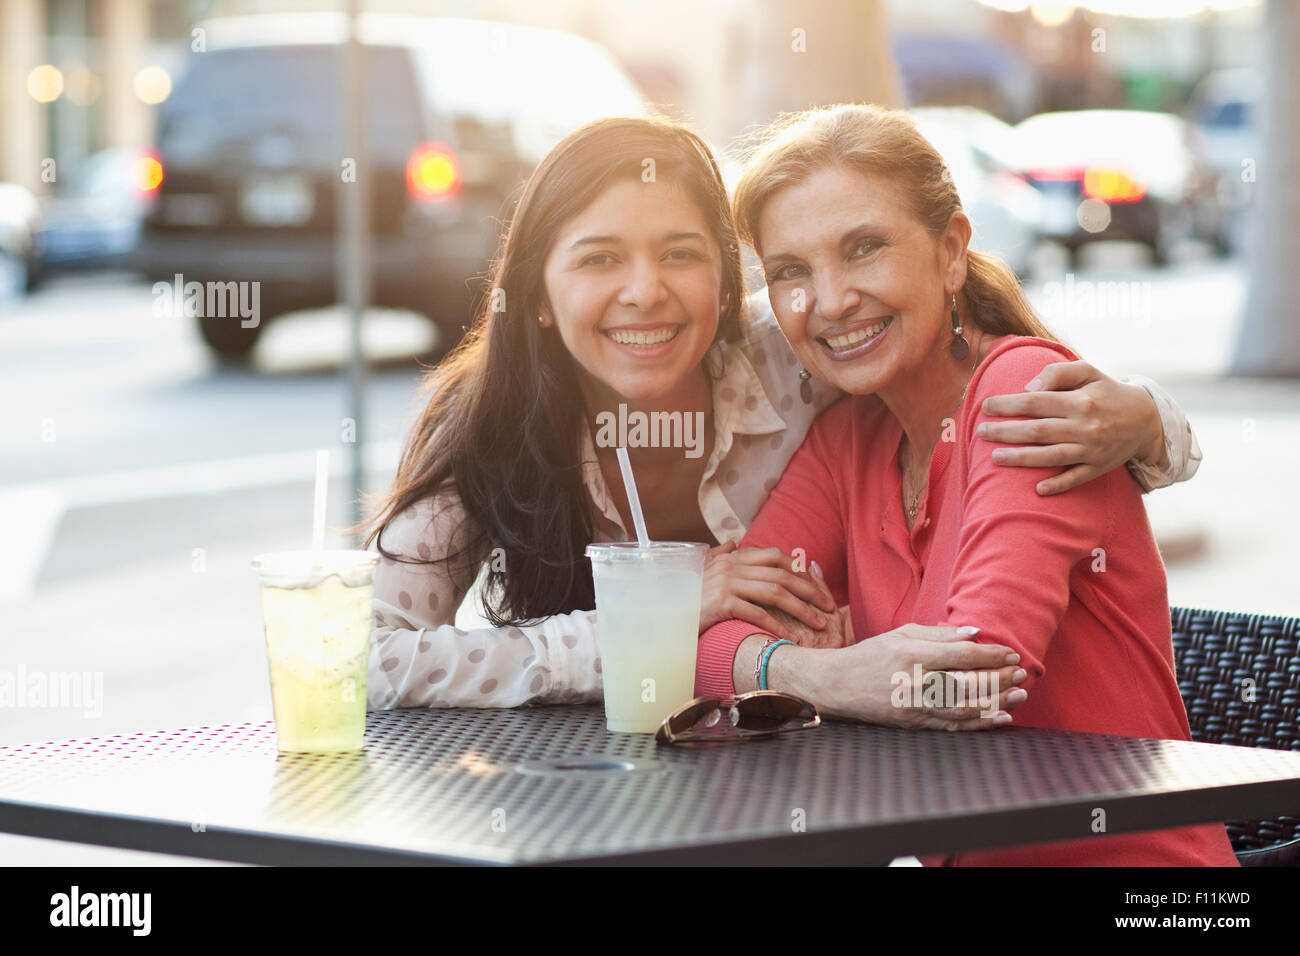 Mother and daughter hugging at sidewalk cafe Stock Photo